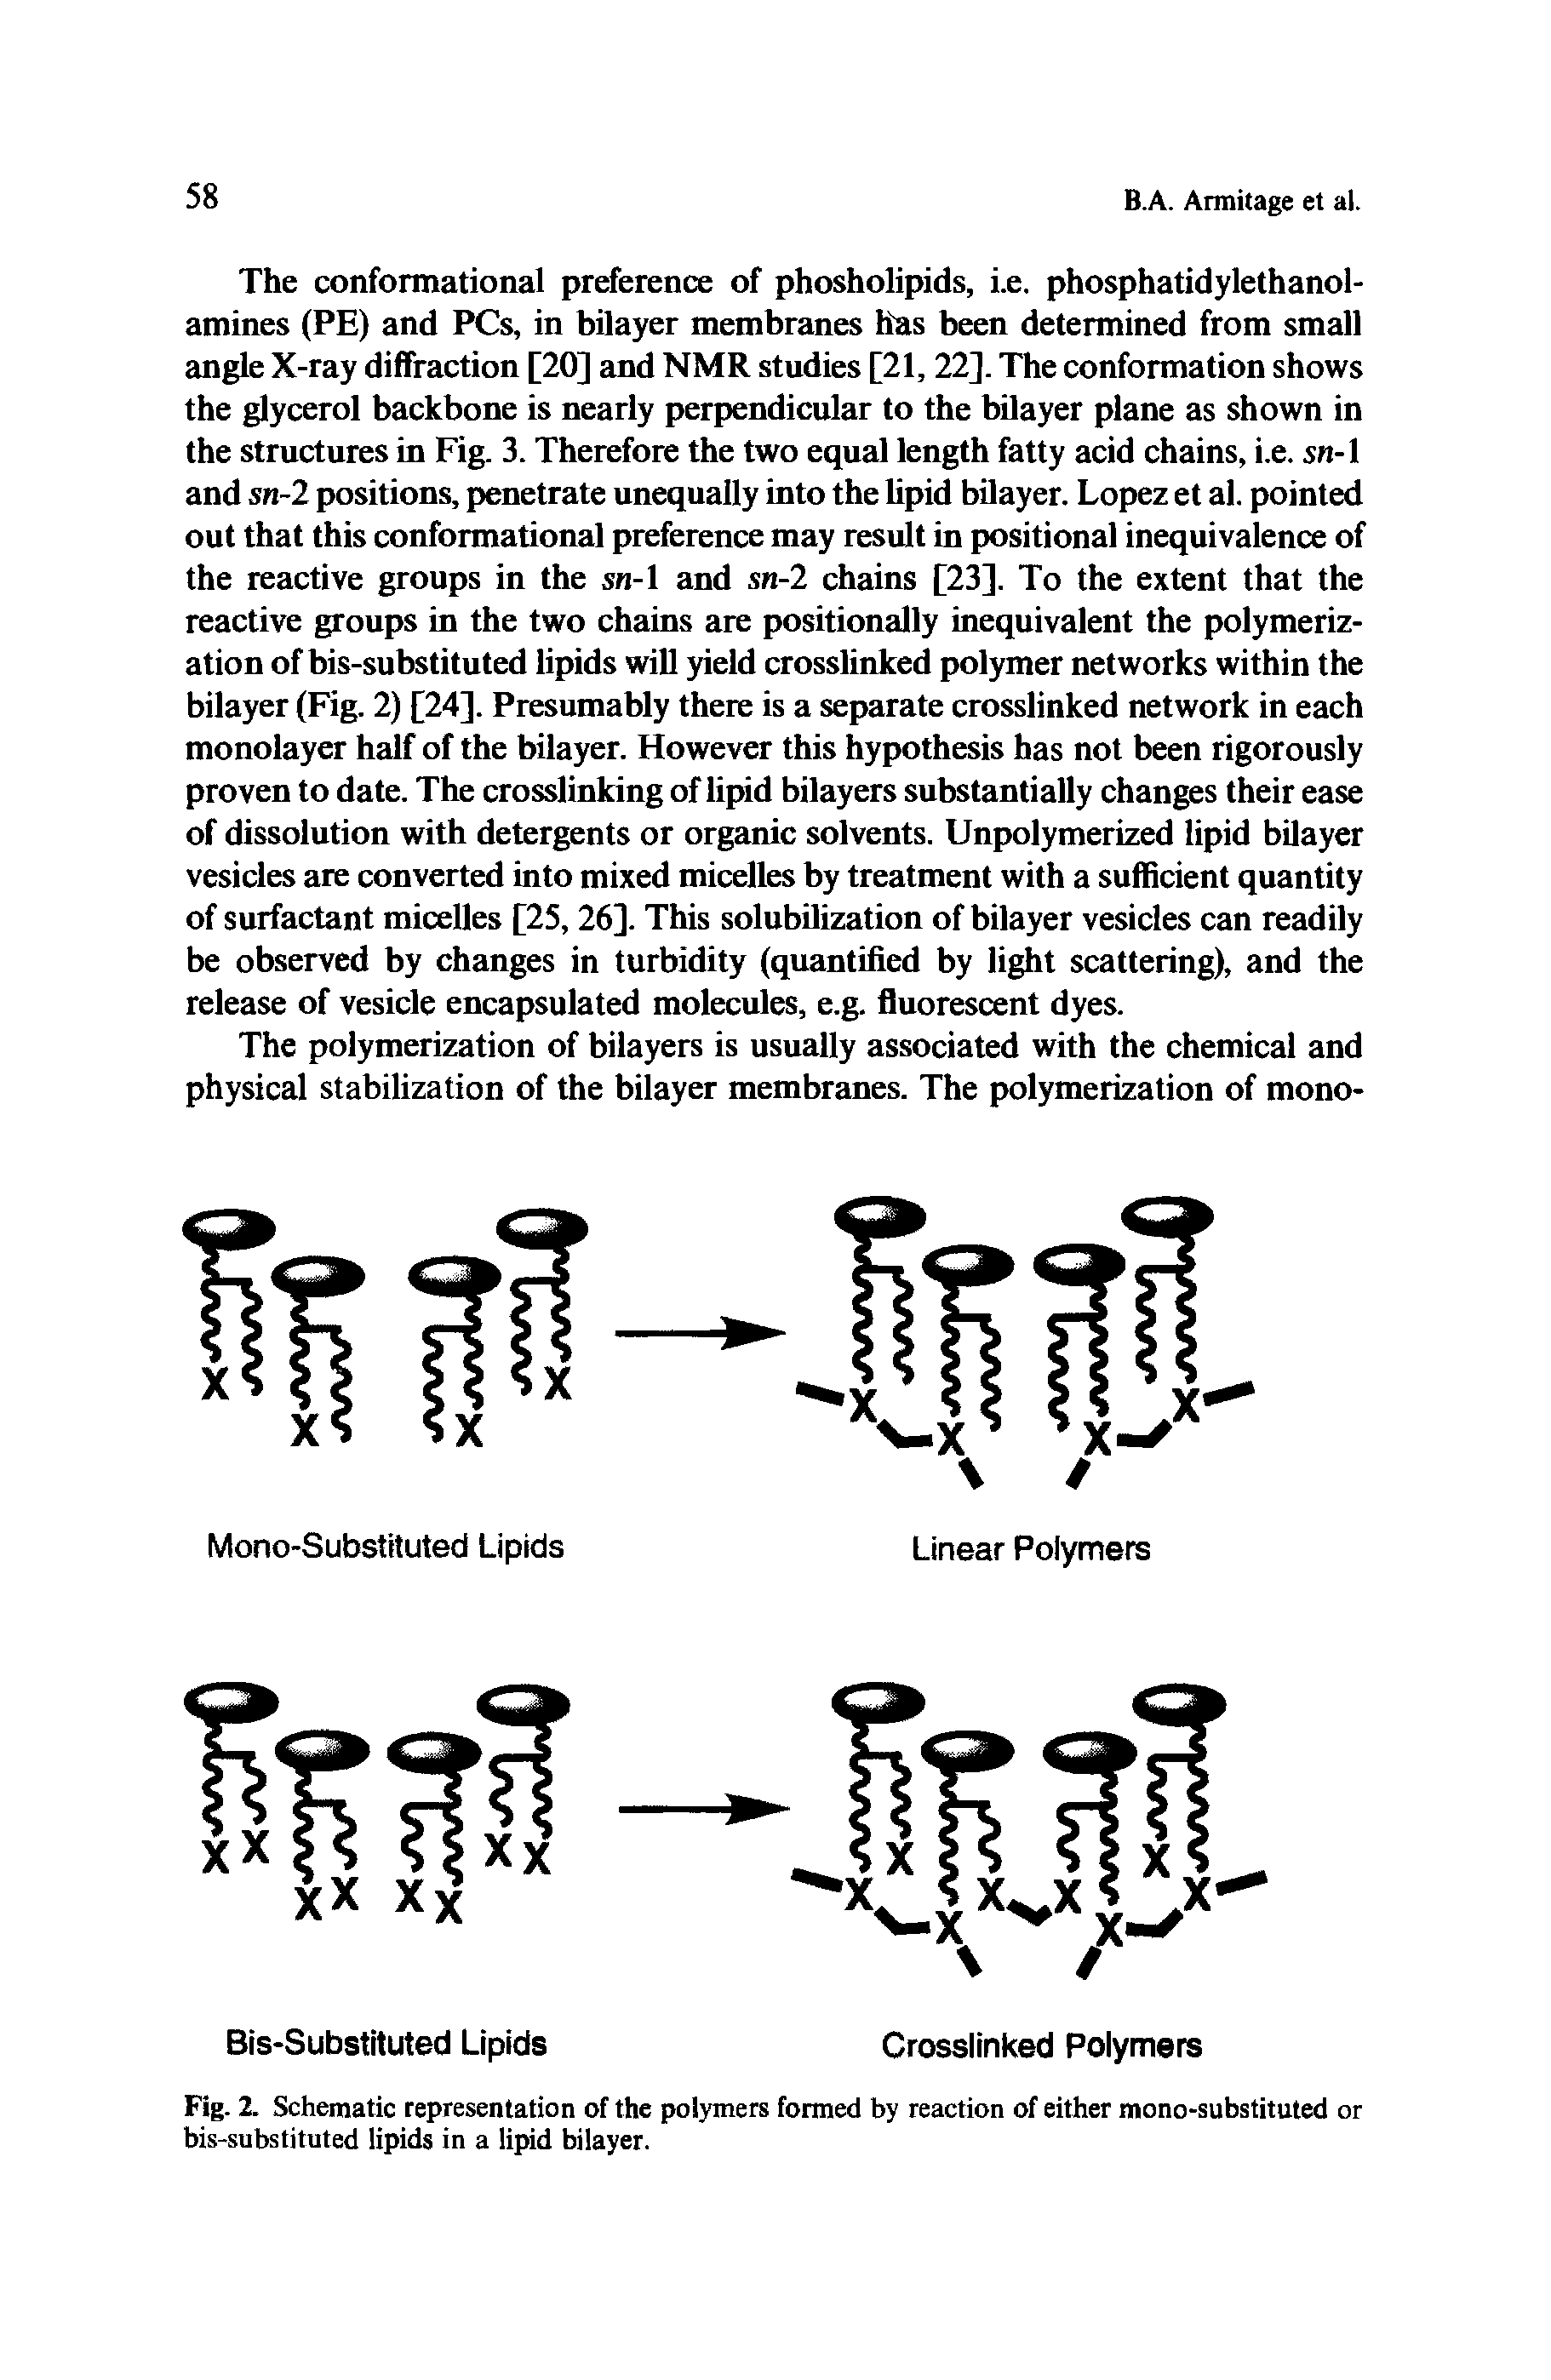 Fig. 2. Schematic representation of the polymers formed by reaction of either mono-substituted or bis-substituted lipids in a lipid bilayer.